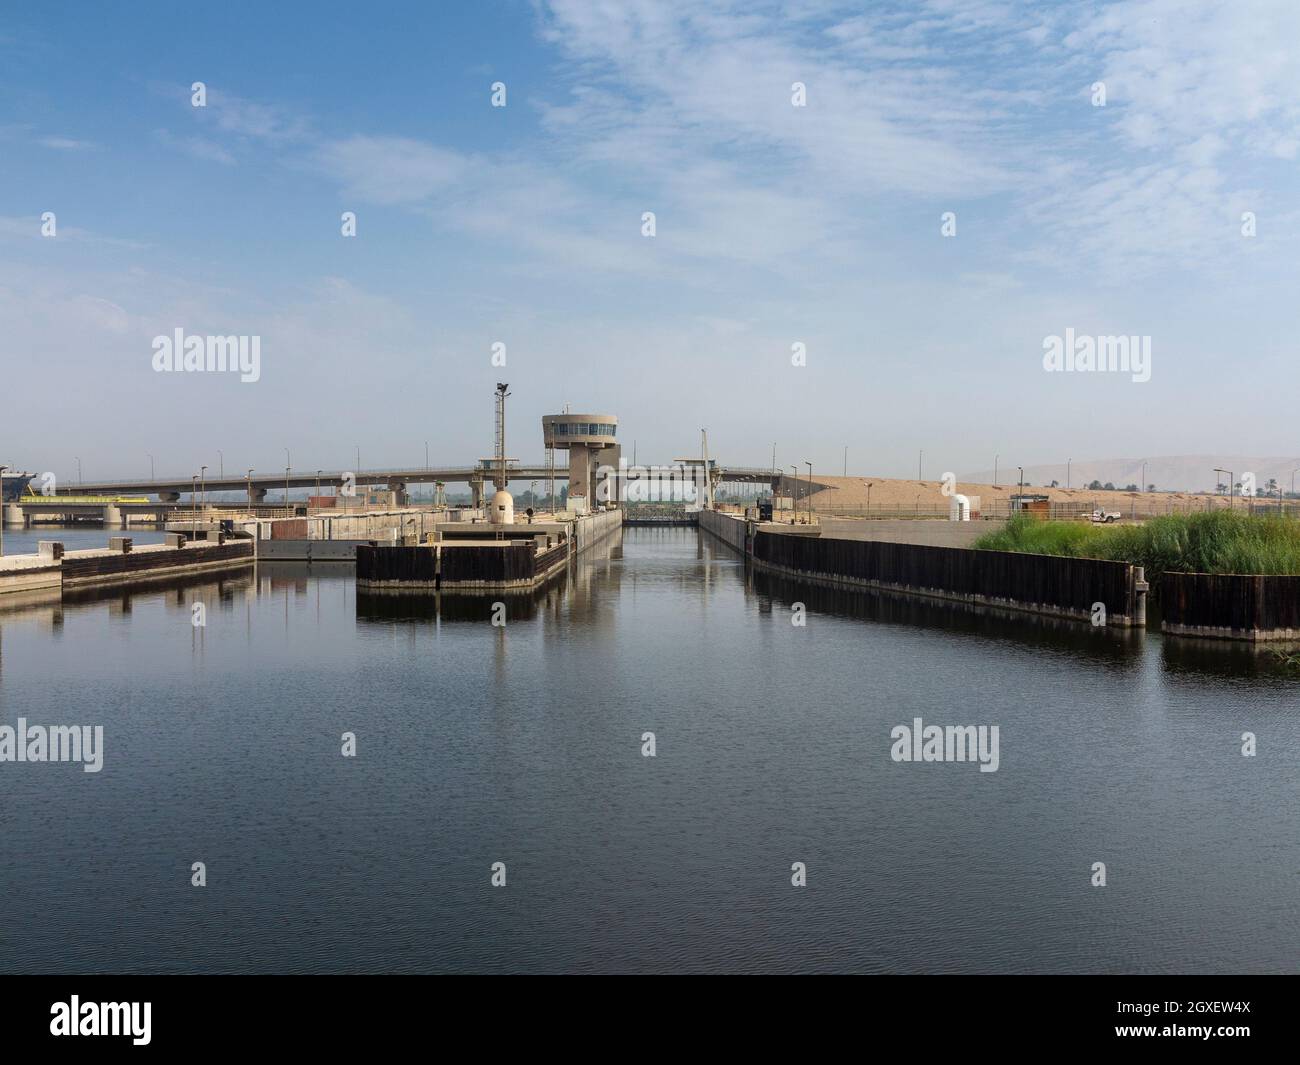 Distant view of two lock bays with control tower on the river Nile, Egypt Stock Photo